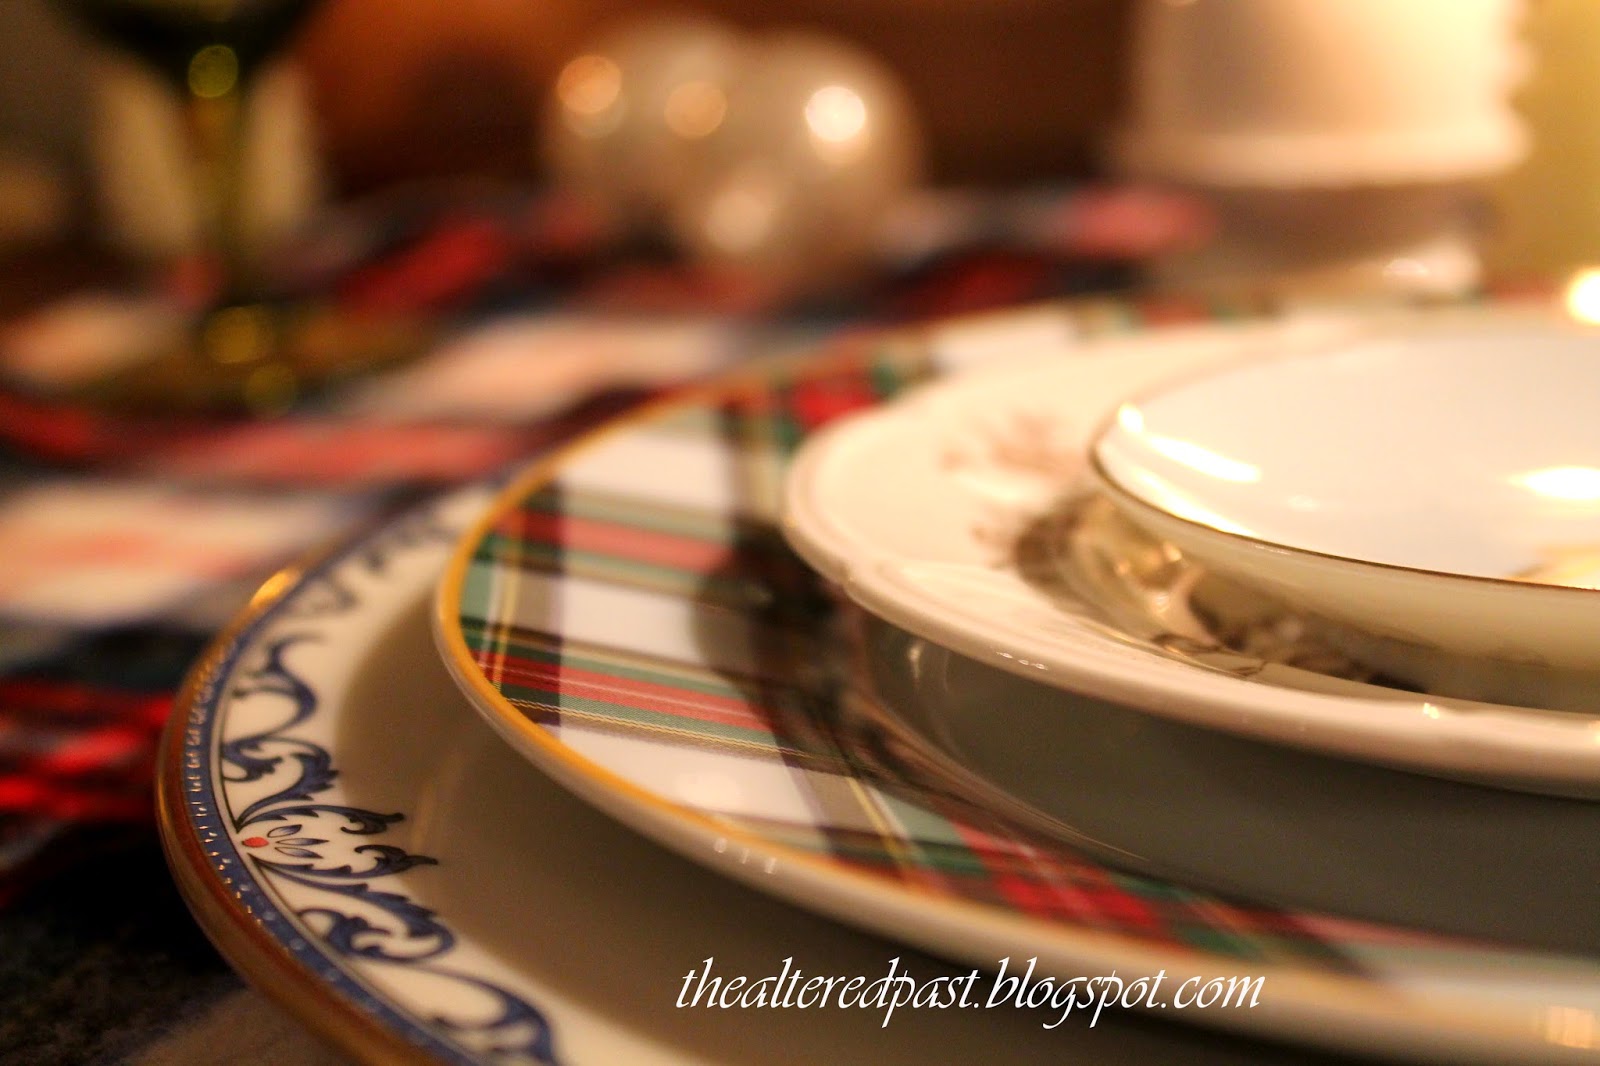 tartan and transferware plate tablescape, the altered past blog